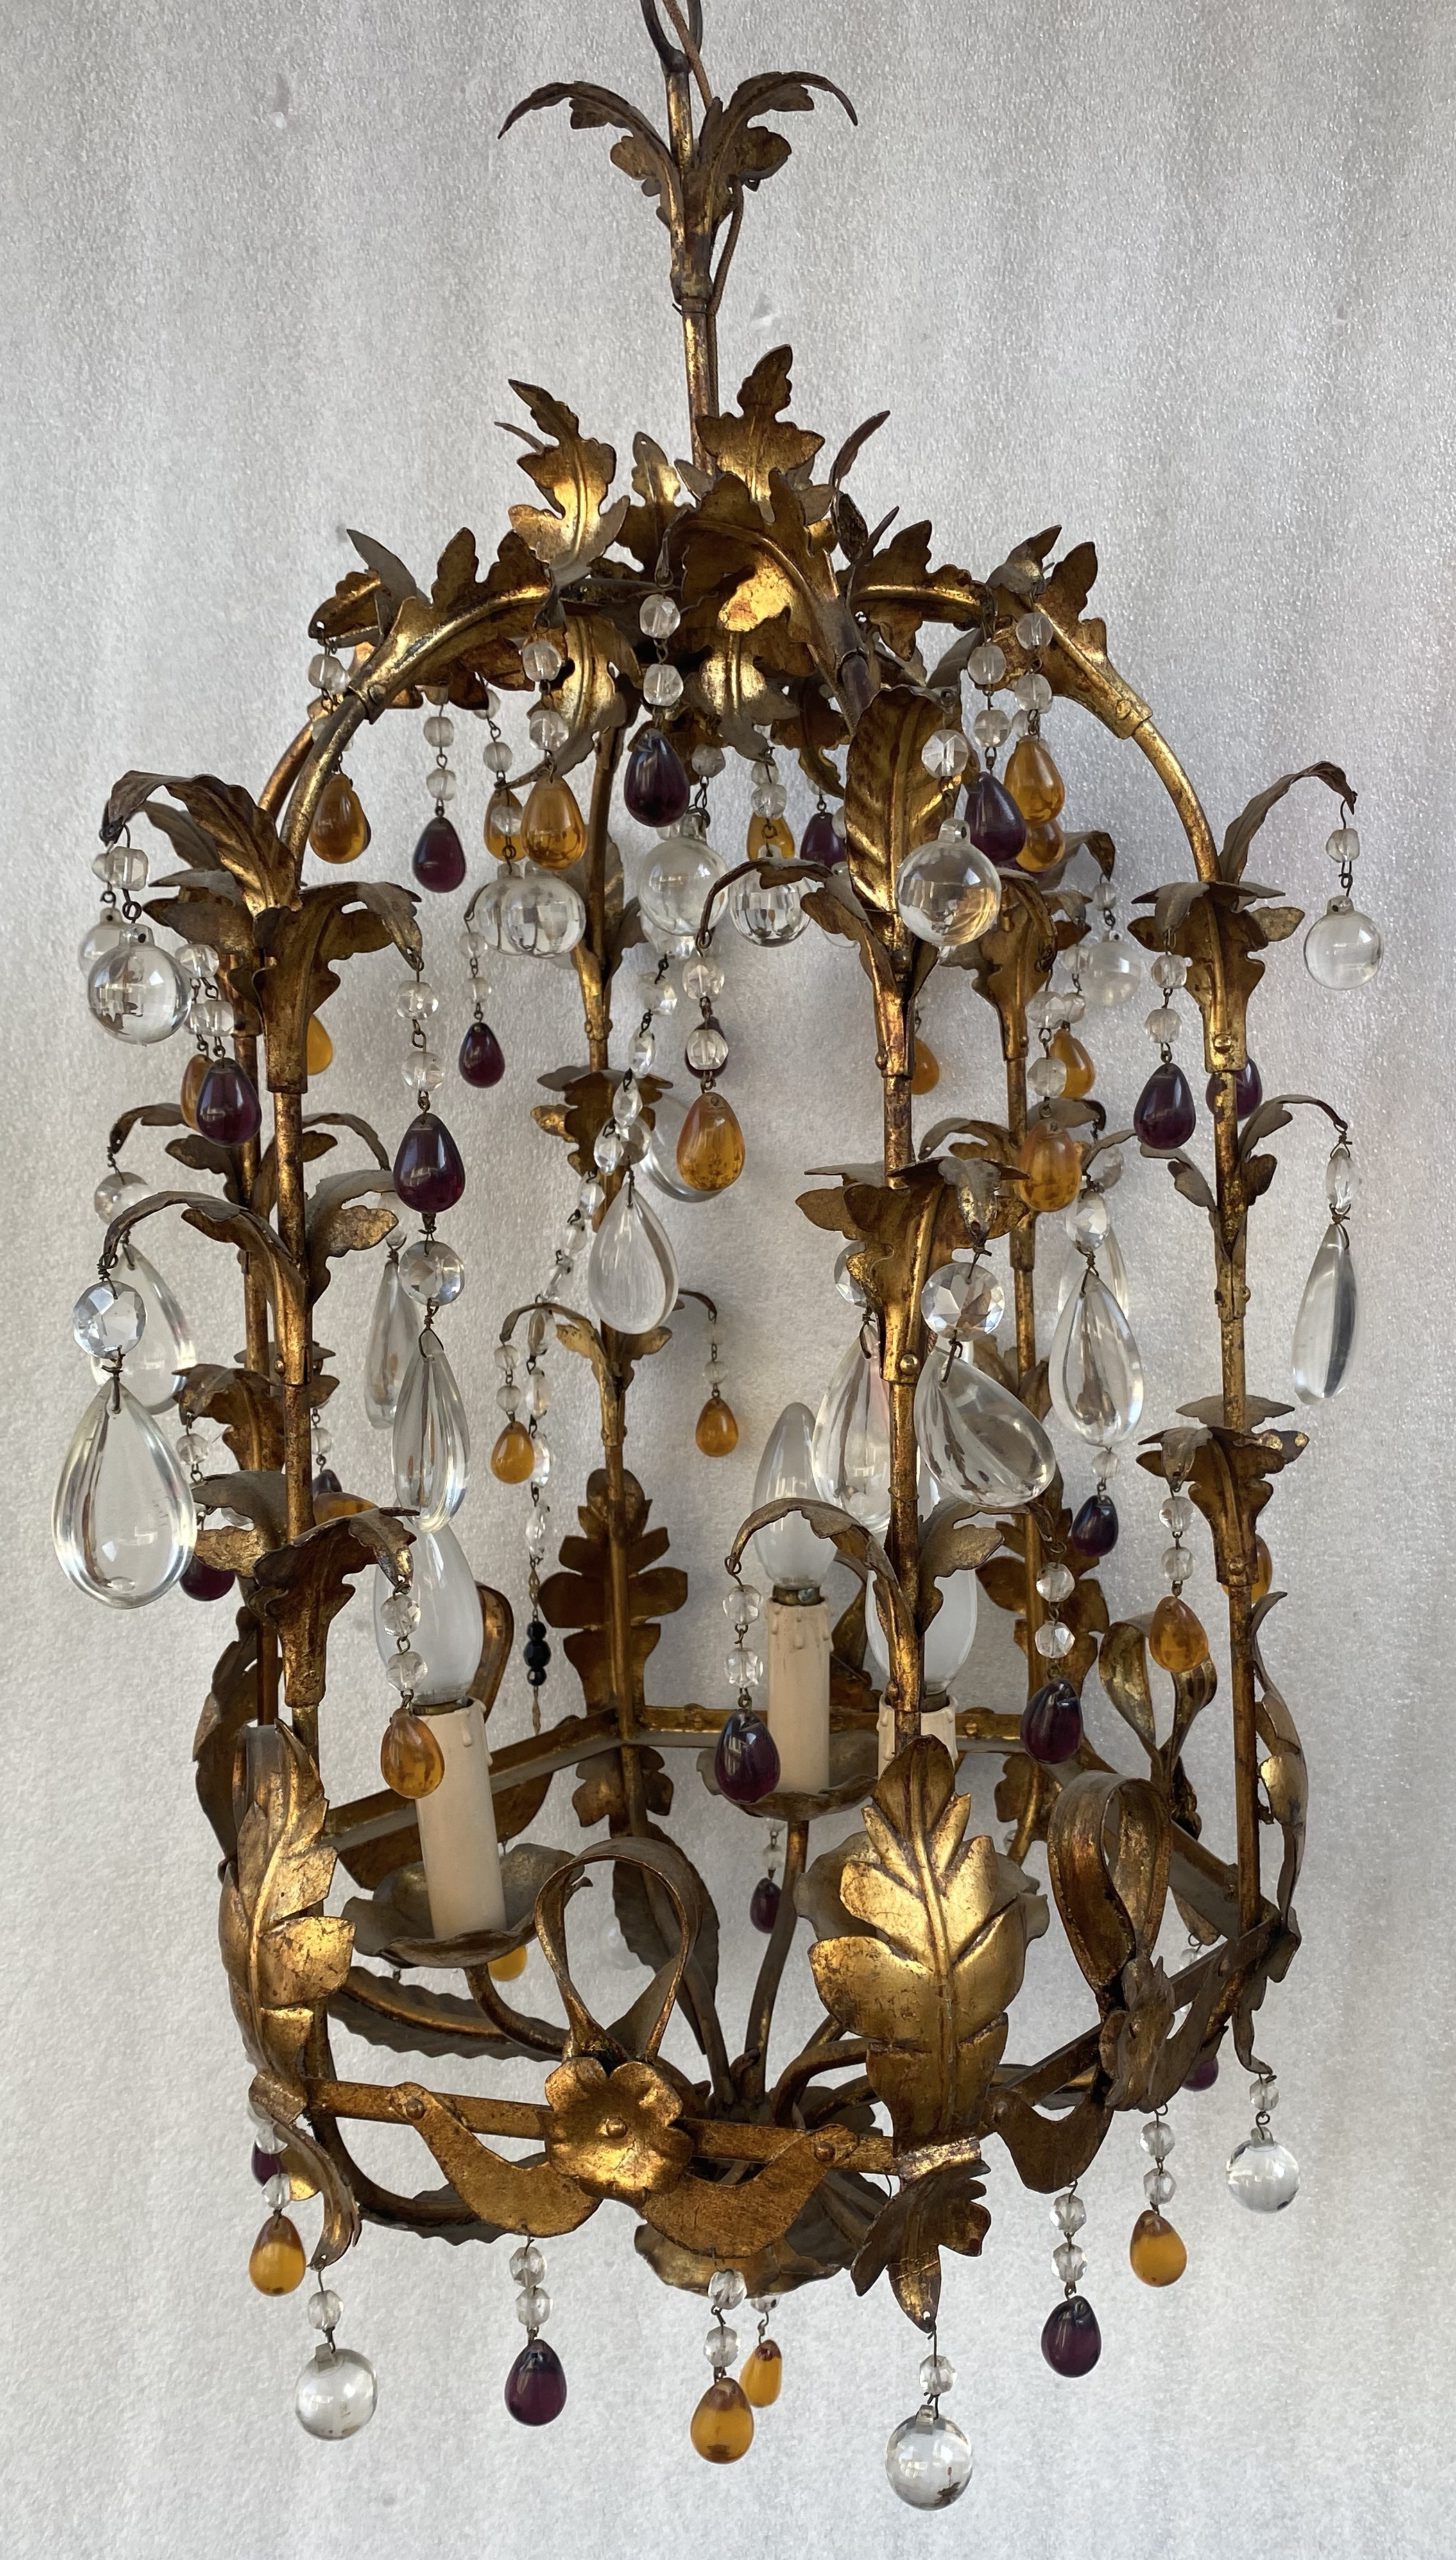 Abcpascal Antiquites Intended For Well Known Gilded Gold Lantern Chandeliers (View 12 of 15)